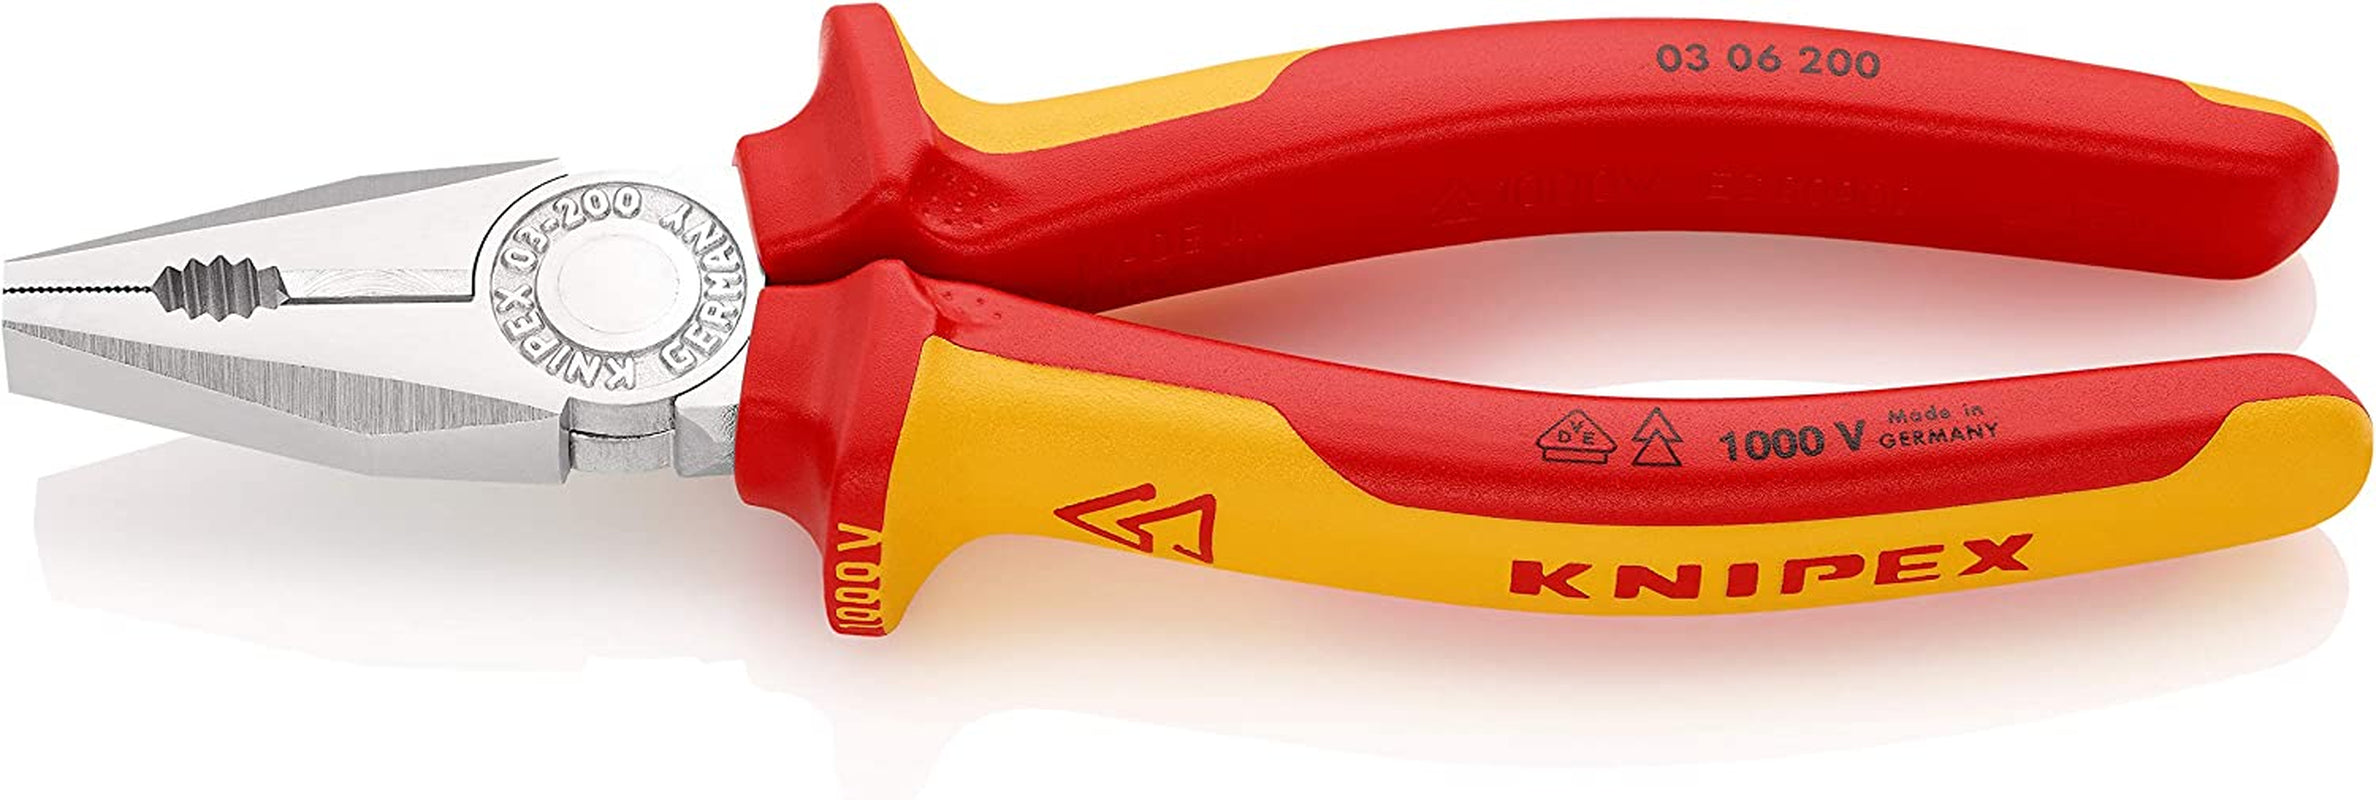 KNIPEX, KNIPEX Combination Pliers 1000V-Insulated (200 Mm) 03 06 200